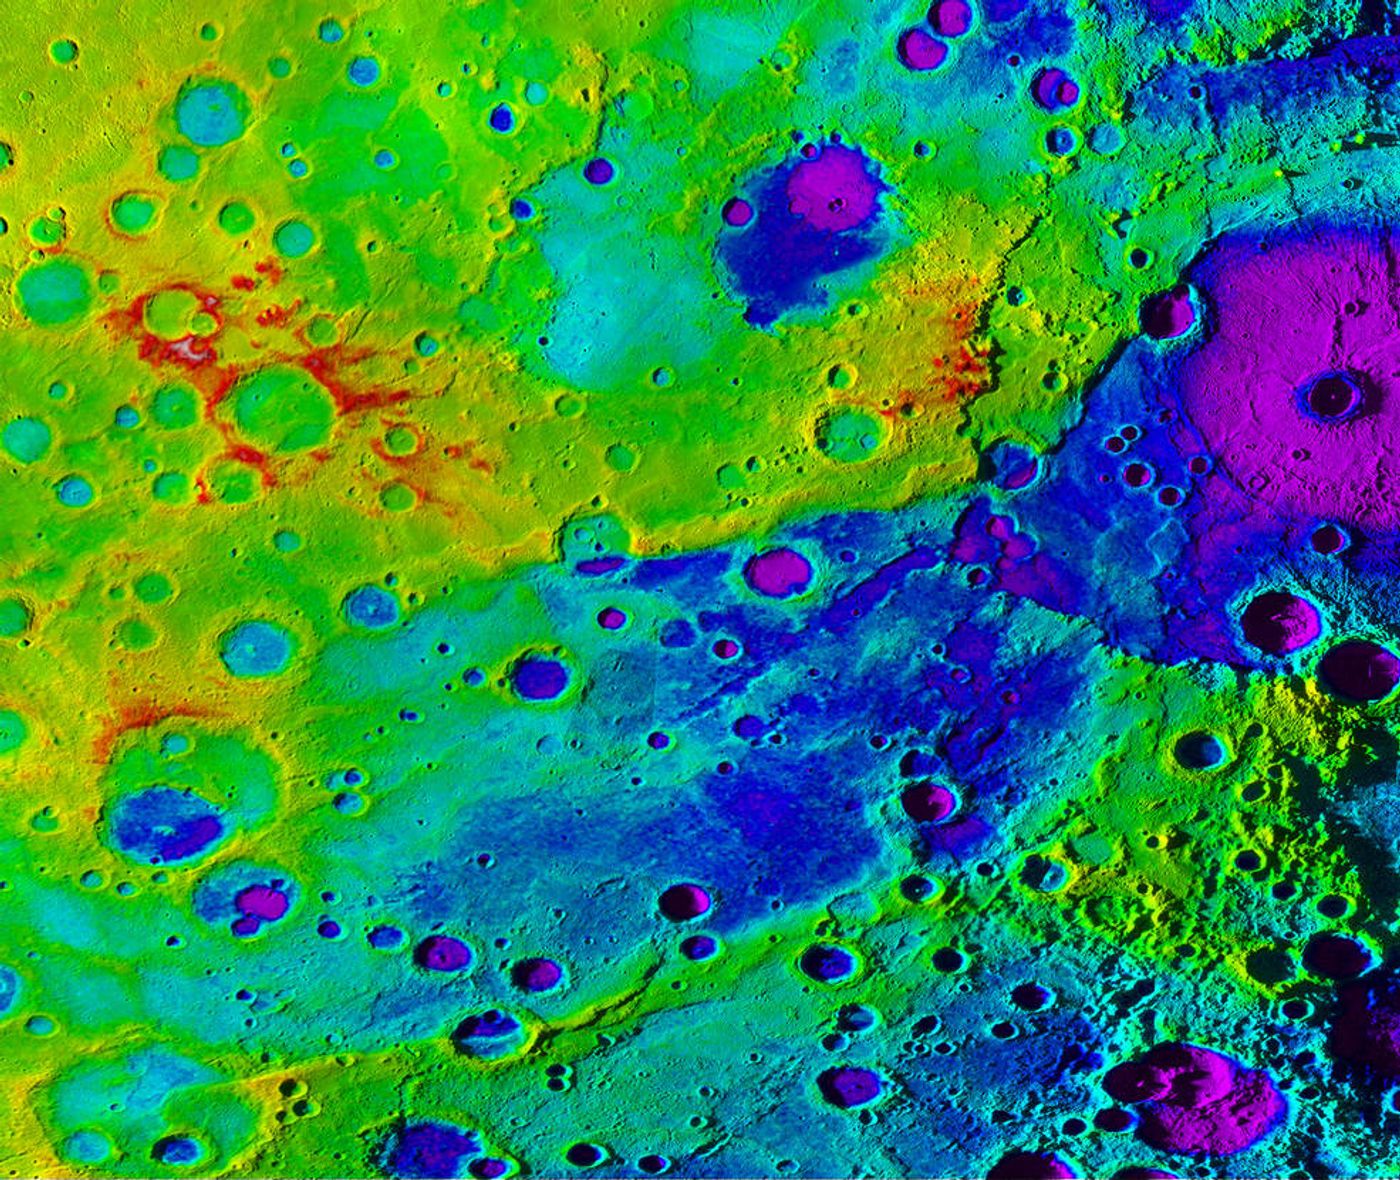 Mercury's Great Valley is reportedly the result of planetary shrinking.